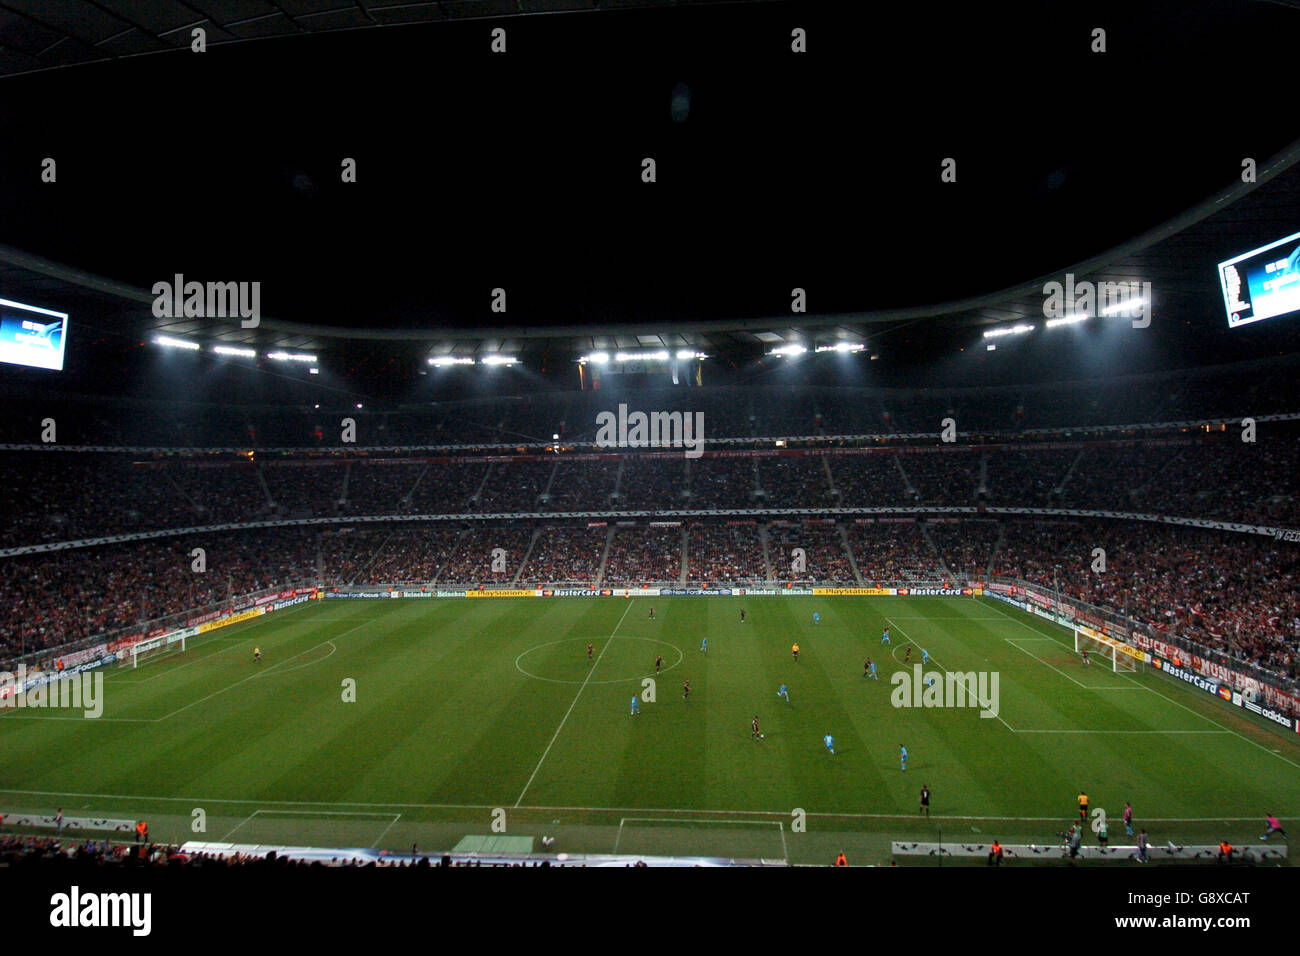 A general view of The Allianz Arena, Home of Bayern Munich Stock Photo